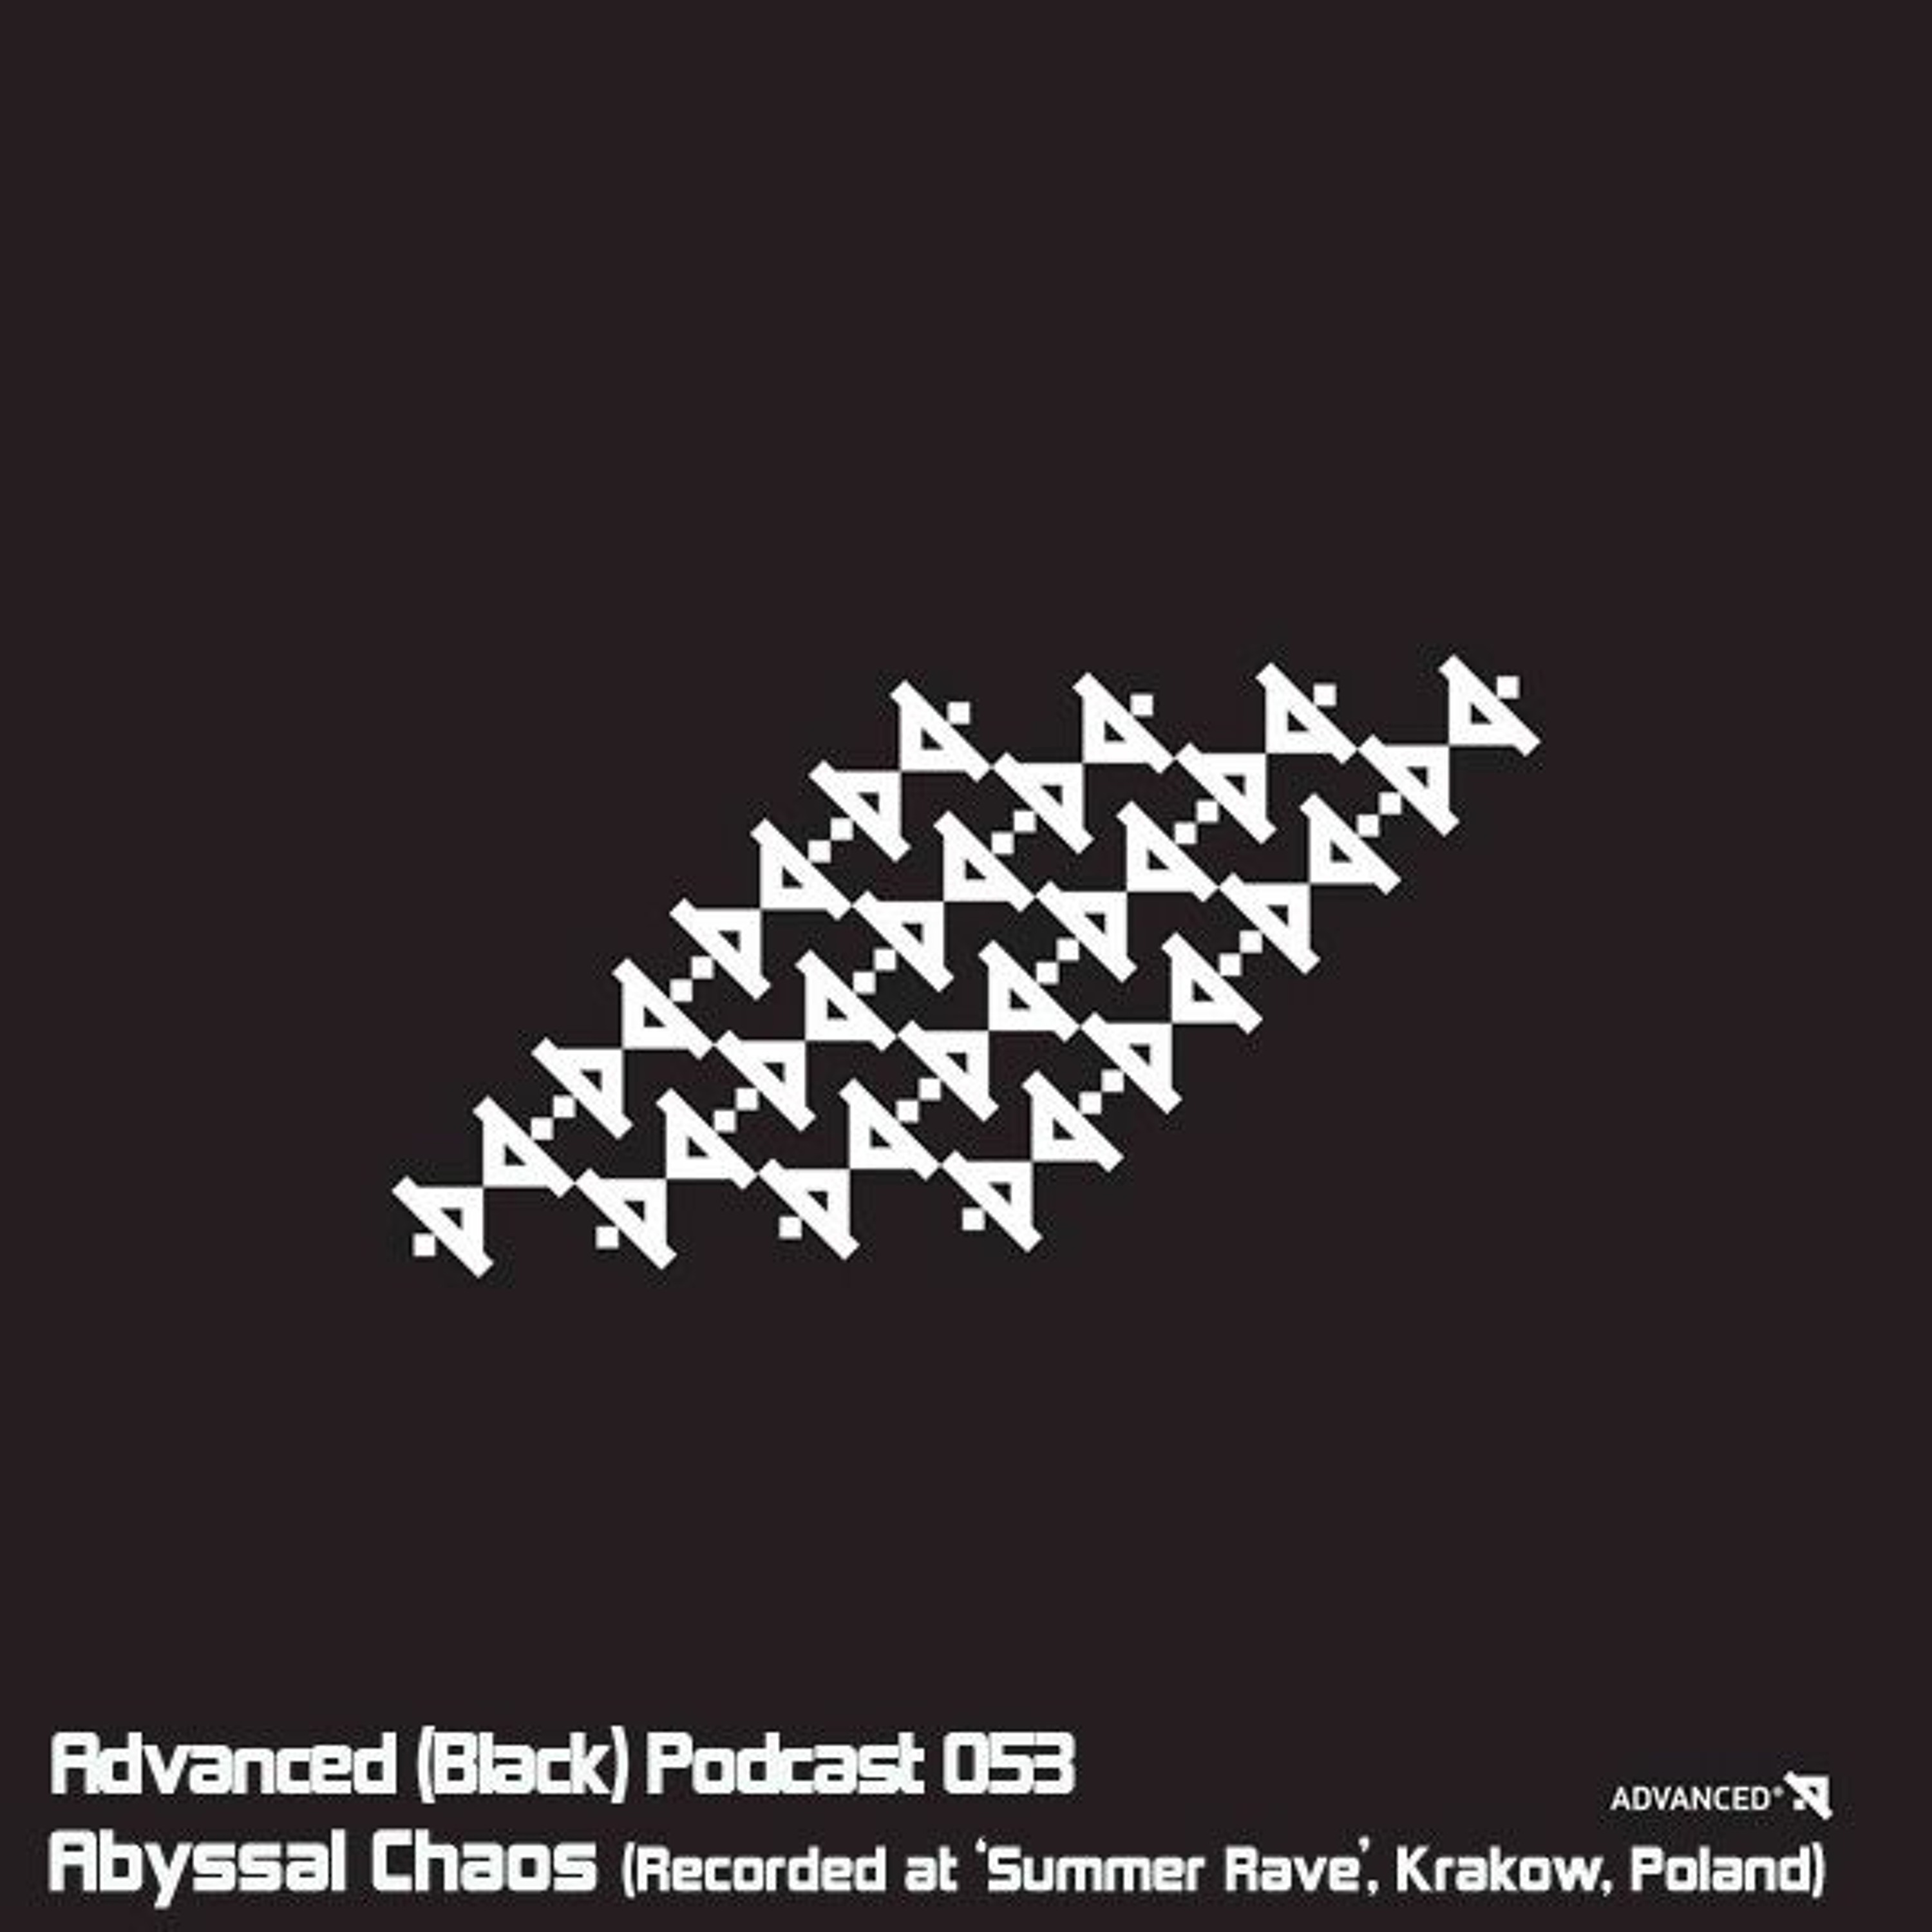 Advanced (Black) Podcast 053 with Abyssal Chaos (Recorded at ’Summer Rave’, Krakow, Poland)